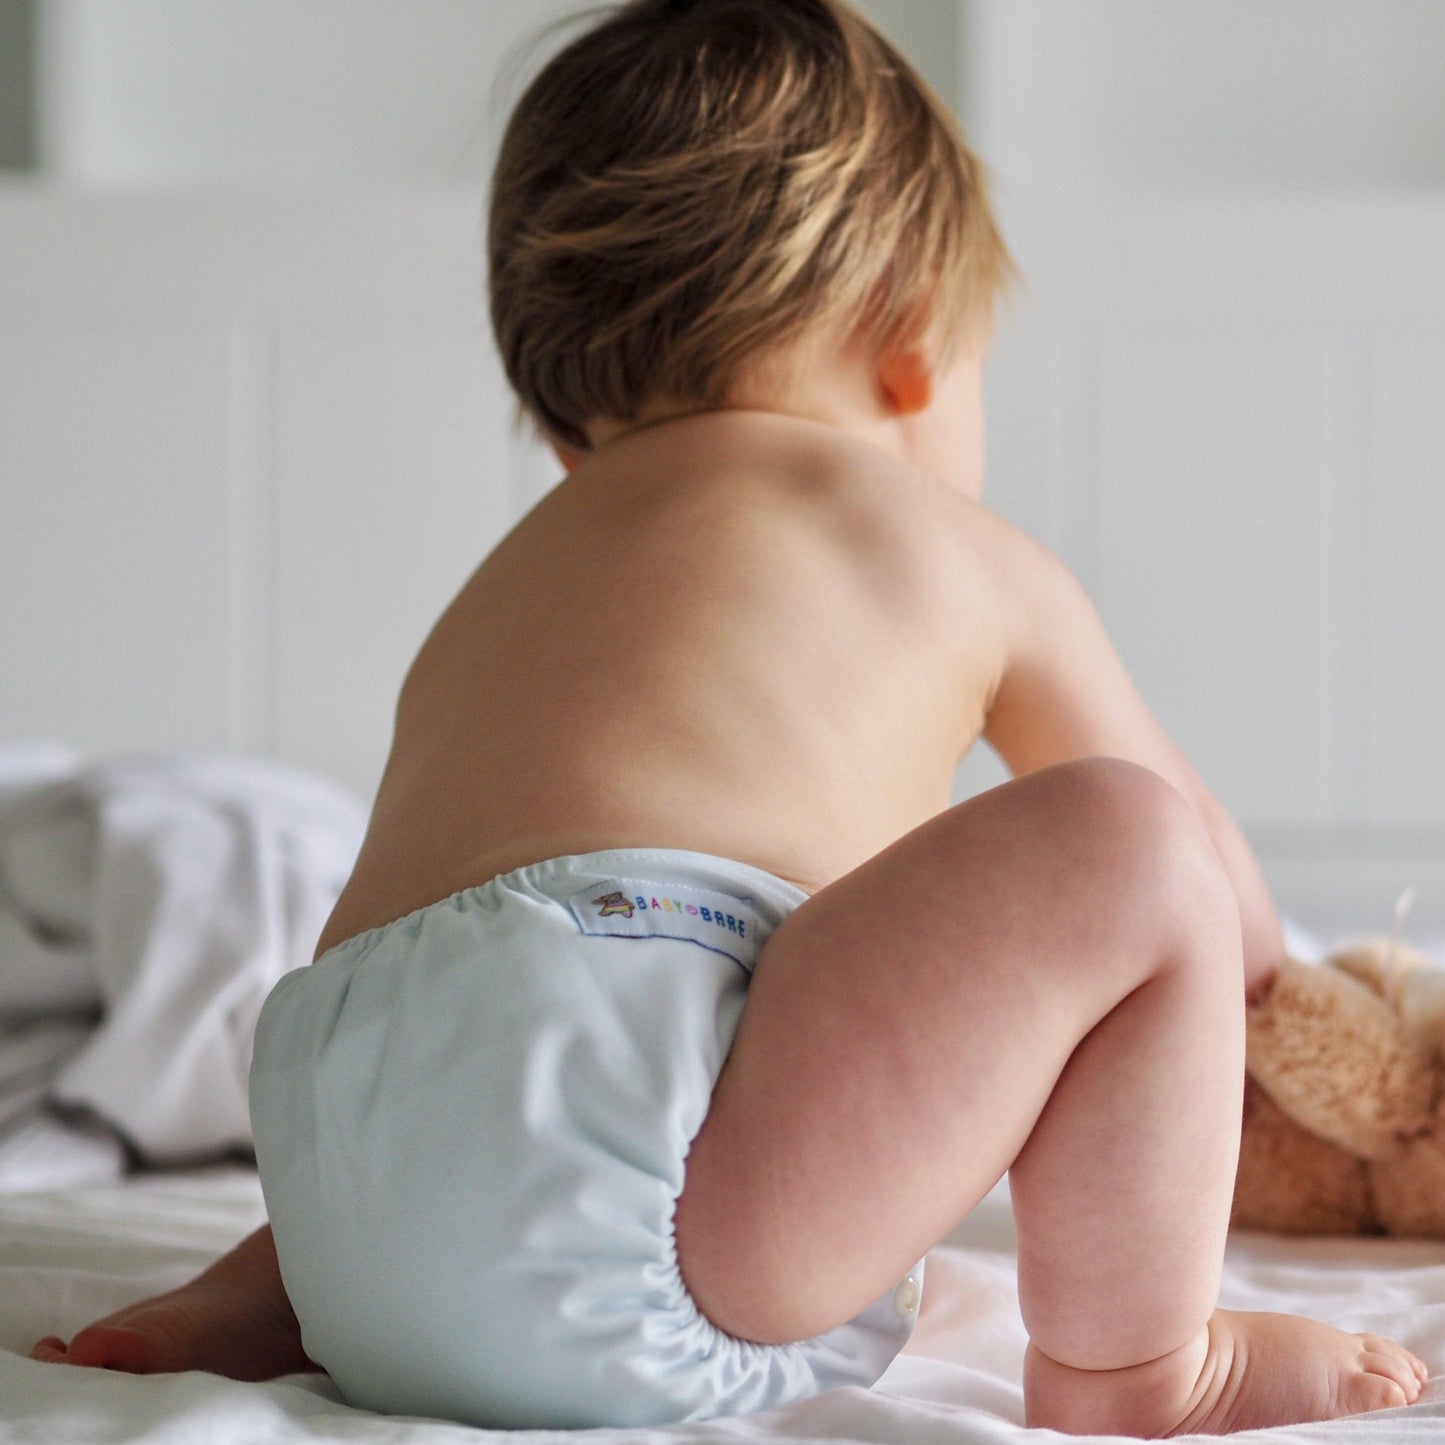 Load image into Gallery viewer, Toddler playing with a teddy bear facing away and wearing a blue nappy. 
